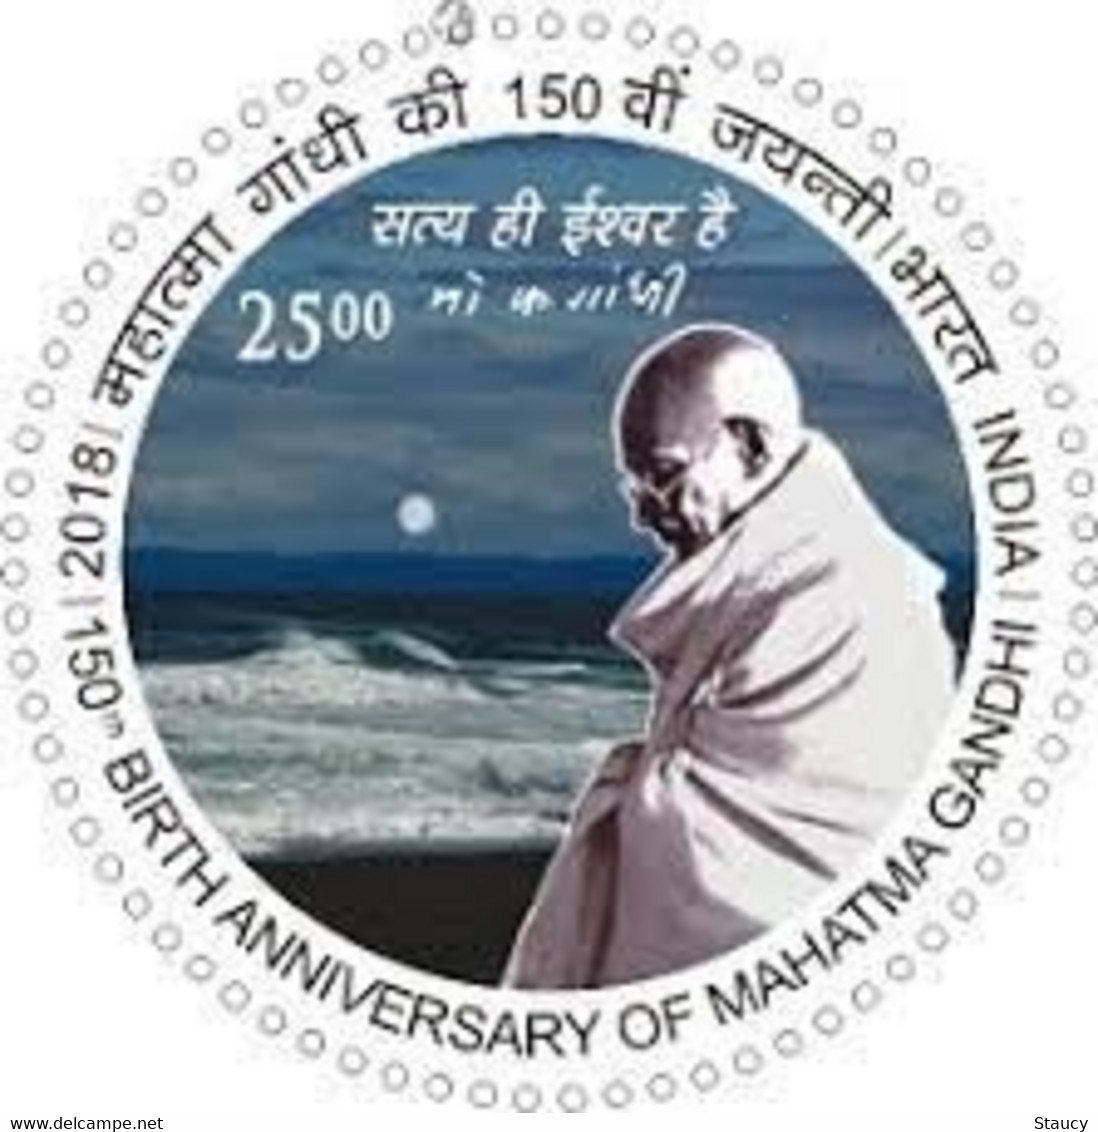 INDIA 2018 Mahatma Gandhi Round Odd Shaped Stamps Rs.25.00 1v STAMP MNH P.O Fresh & Fine - Oddities On Stamps